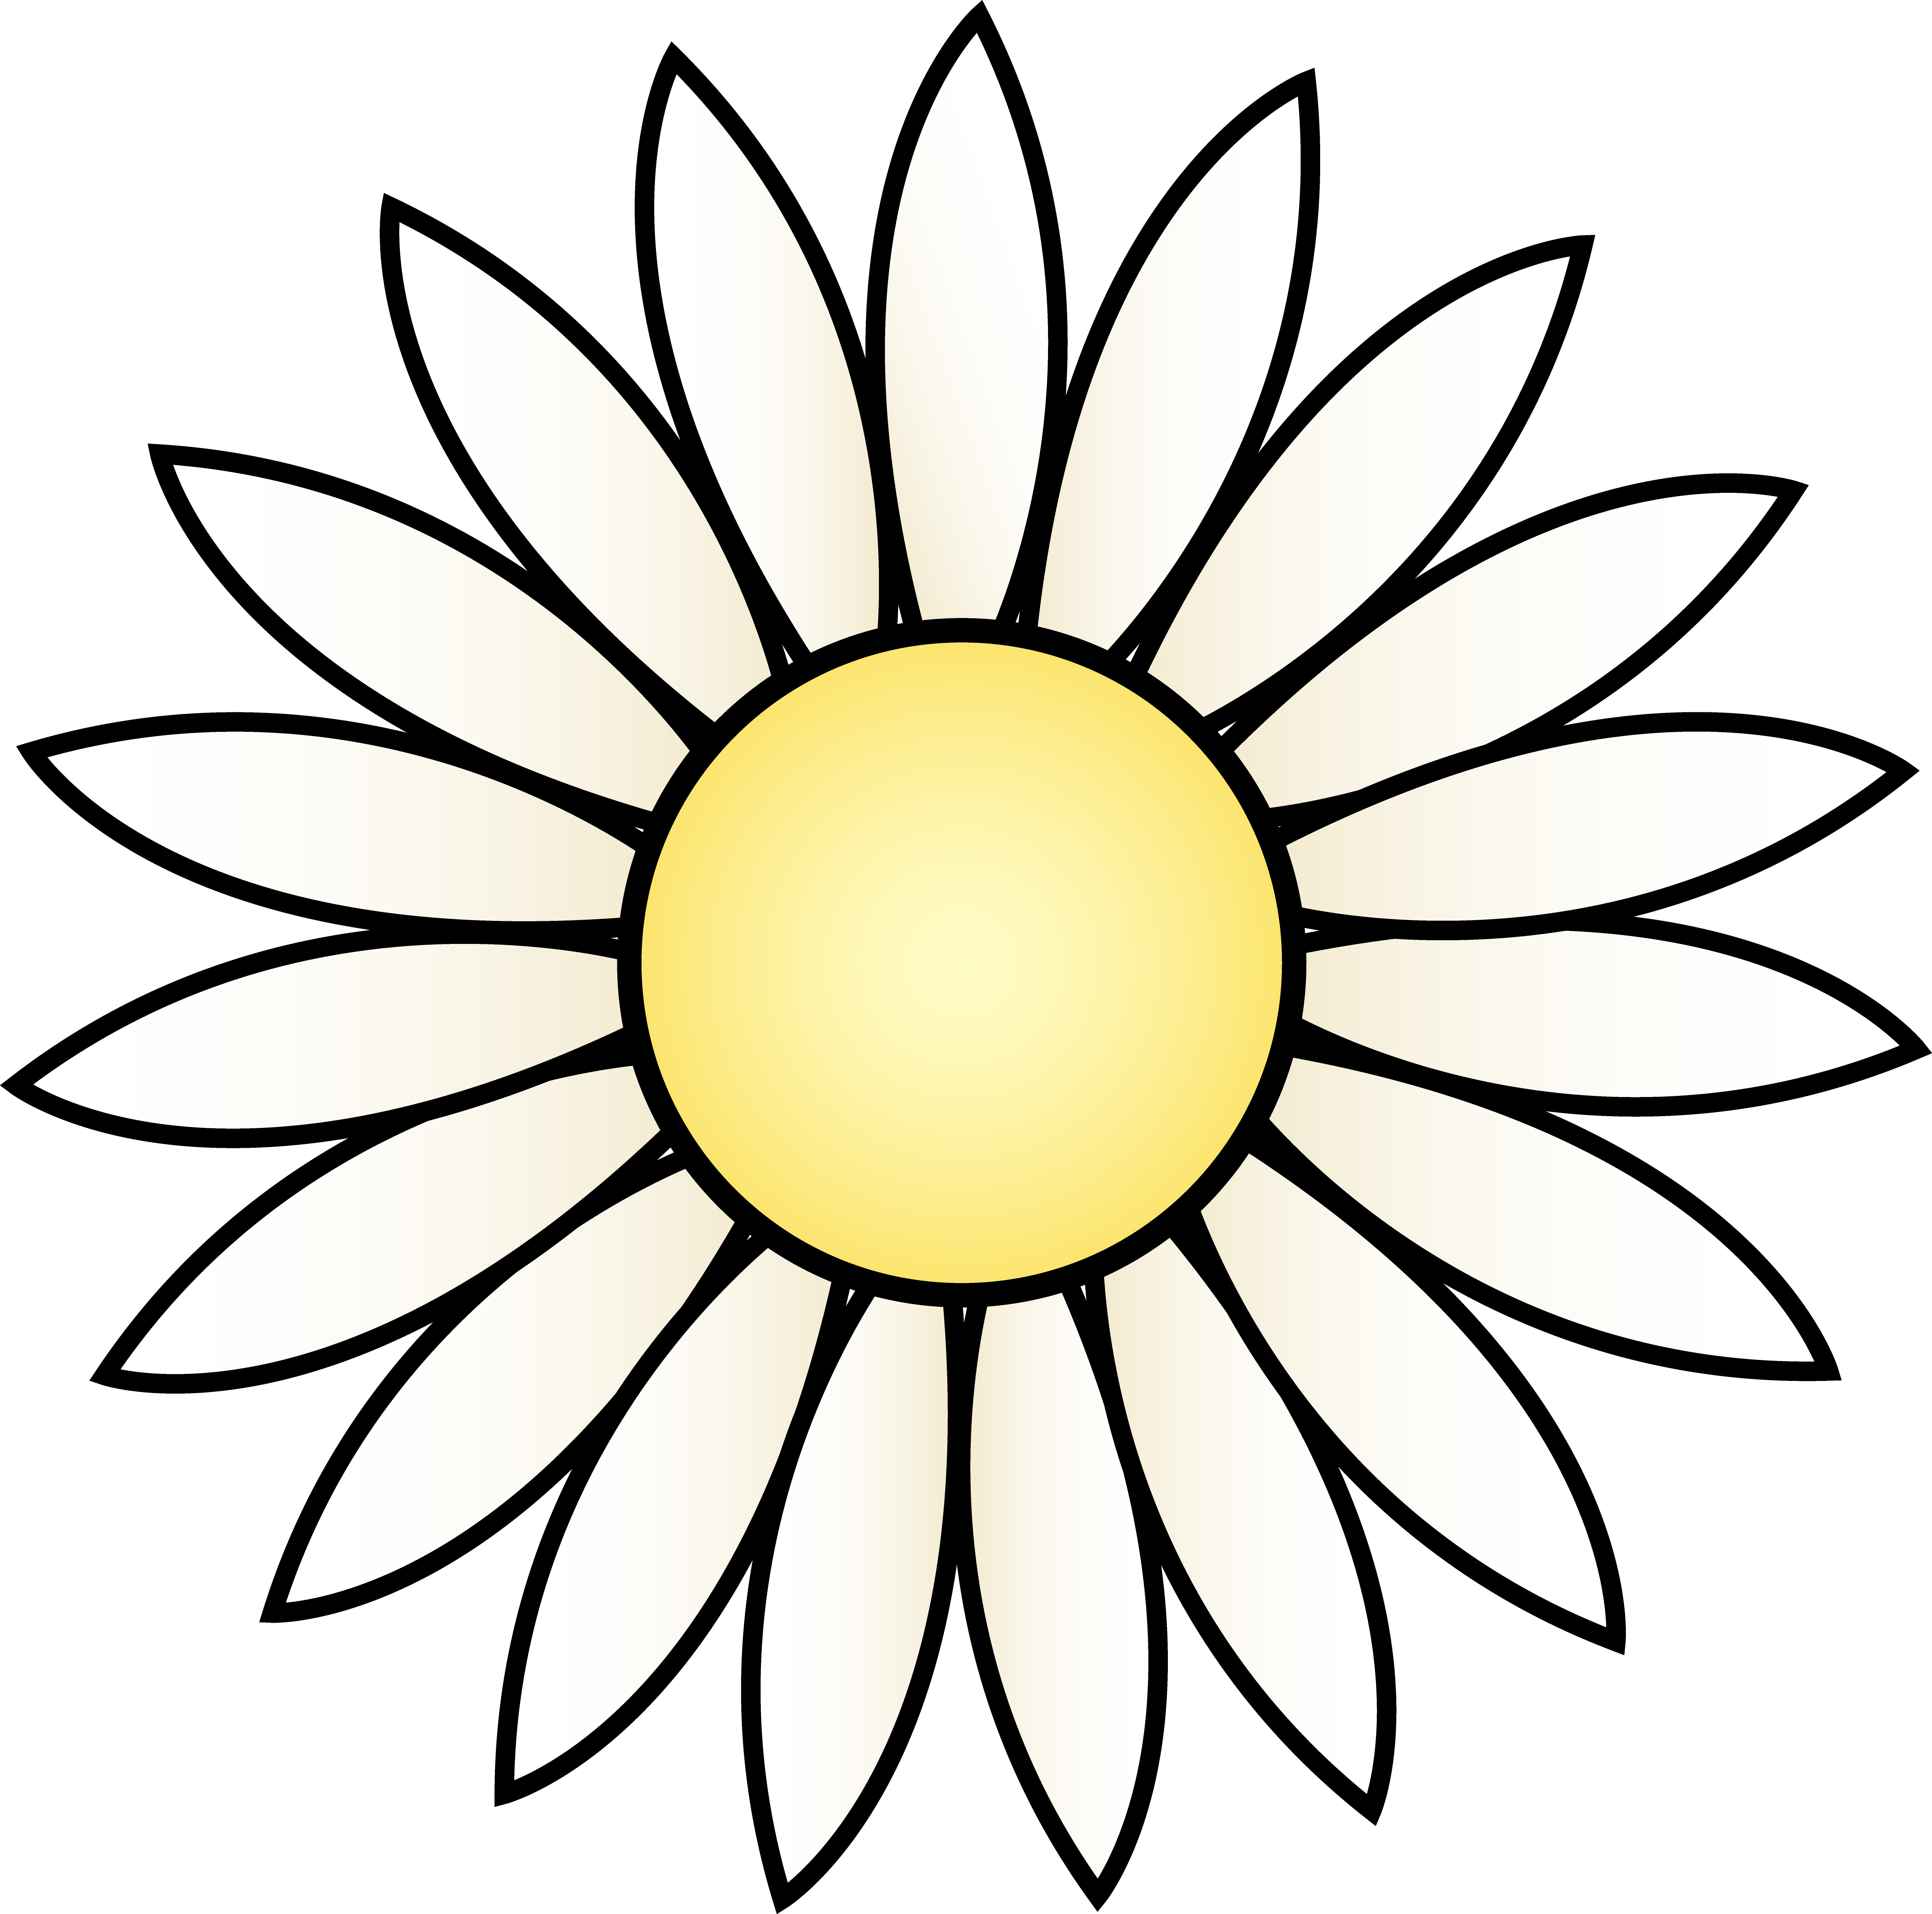 Free Daisy Flower Template Download Free Daisy Flower Template Png Images Free Cliparts On Clipart Library